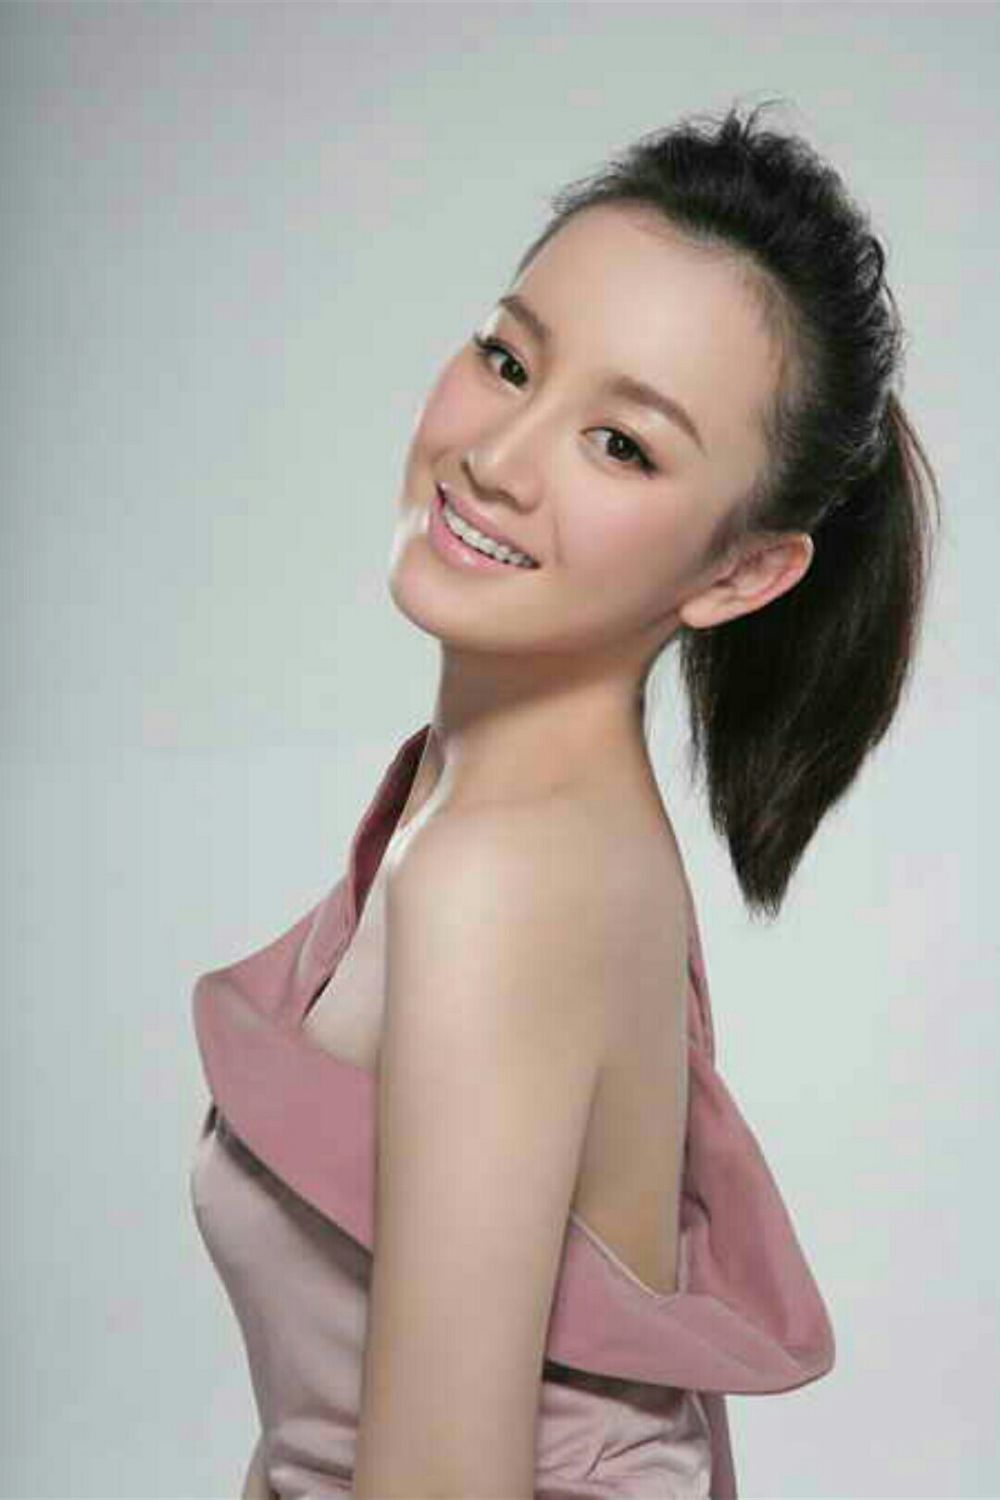 Meng Zhang Sexy and Hottest Photos , Latest Pics